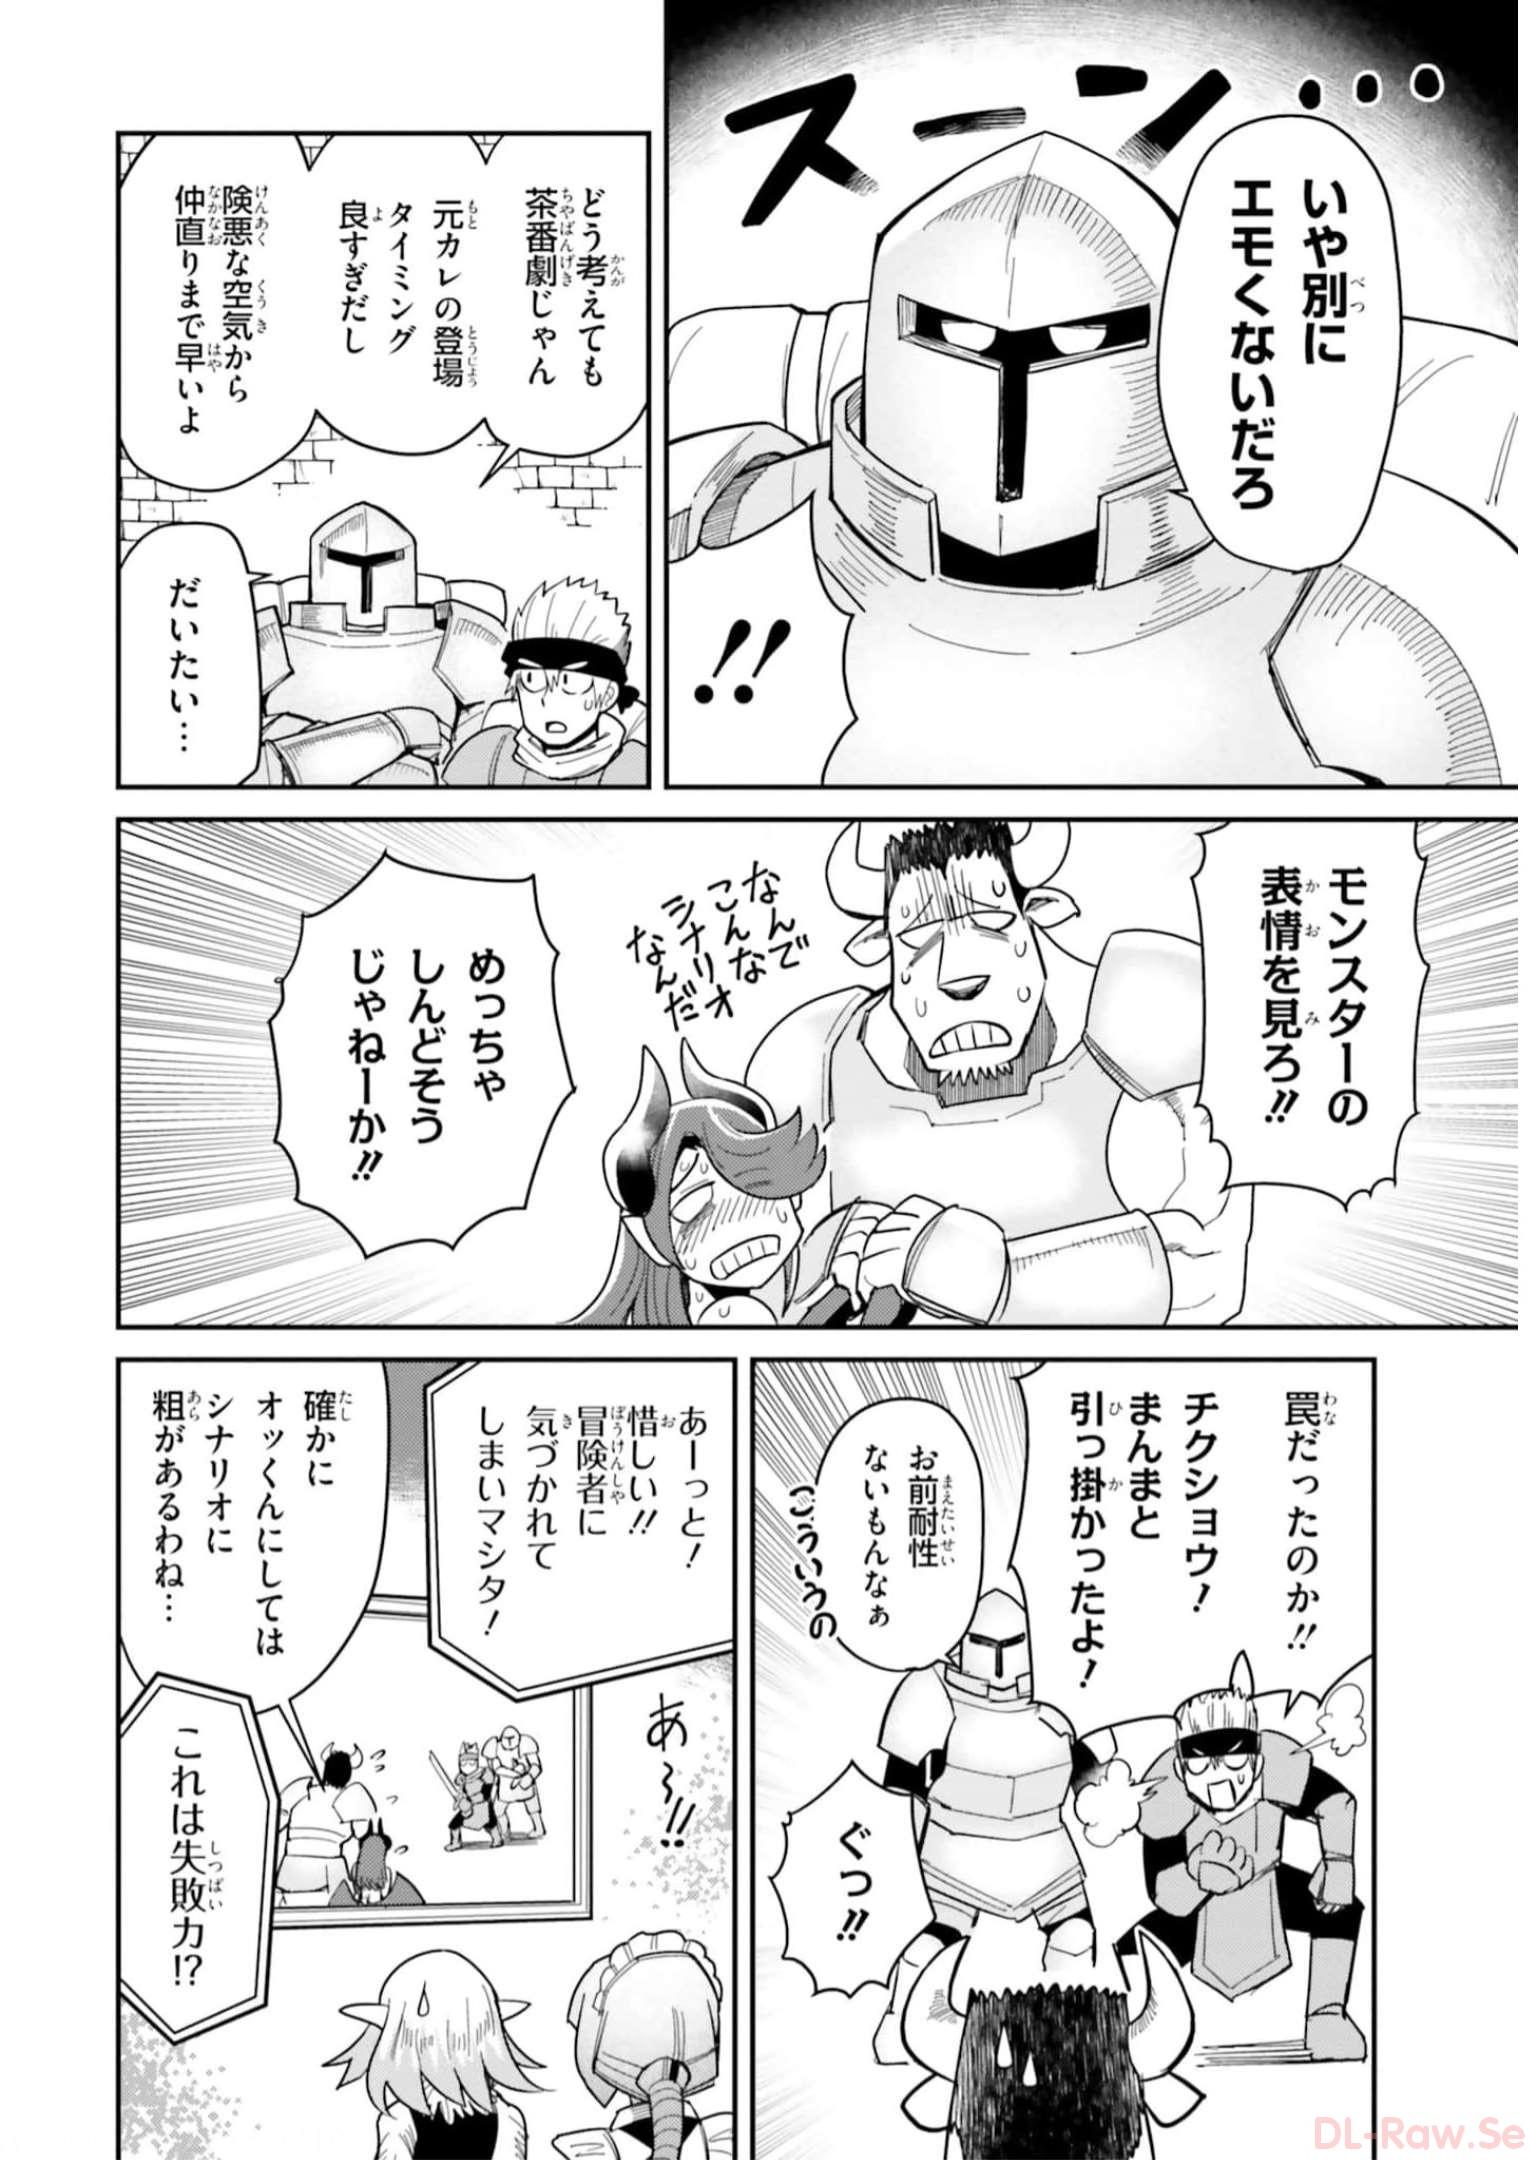 Dungeon Friends Forever Dungeon’s Childhood Friend ダンジョンの幼なじみ 第20話 - Page 16